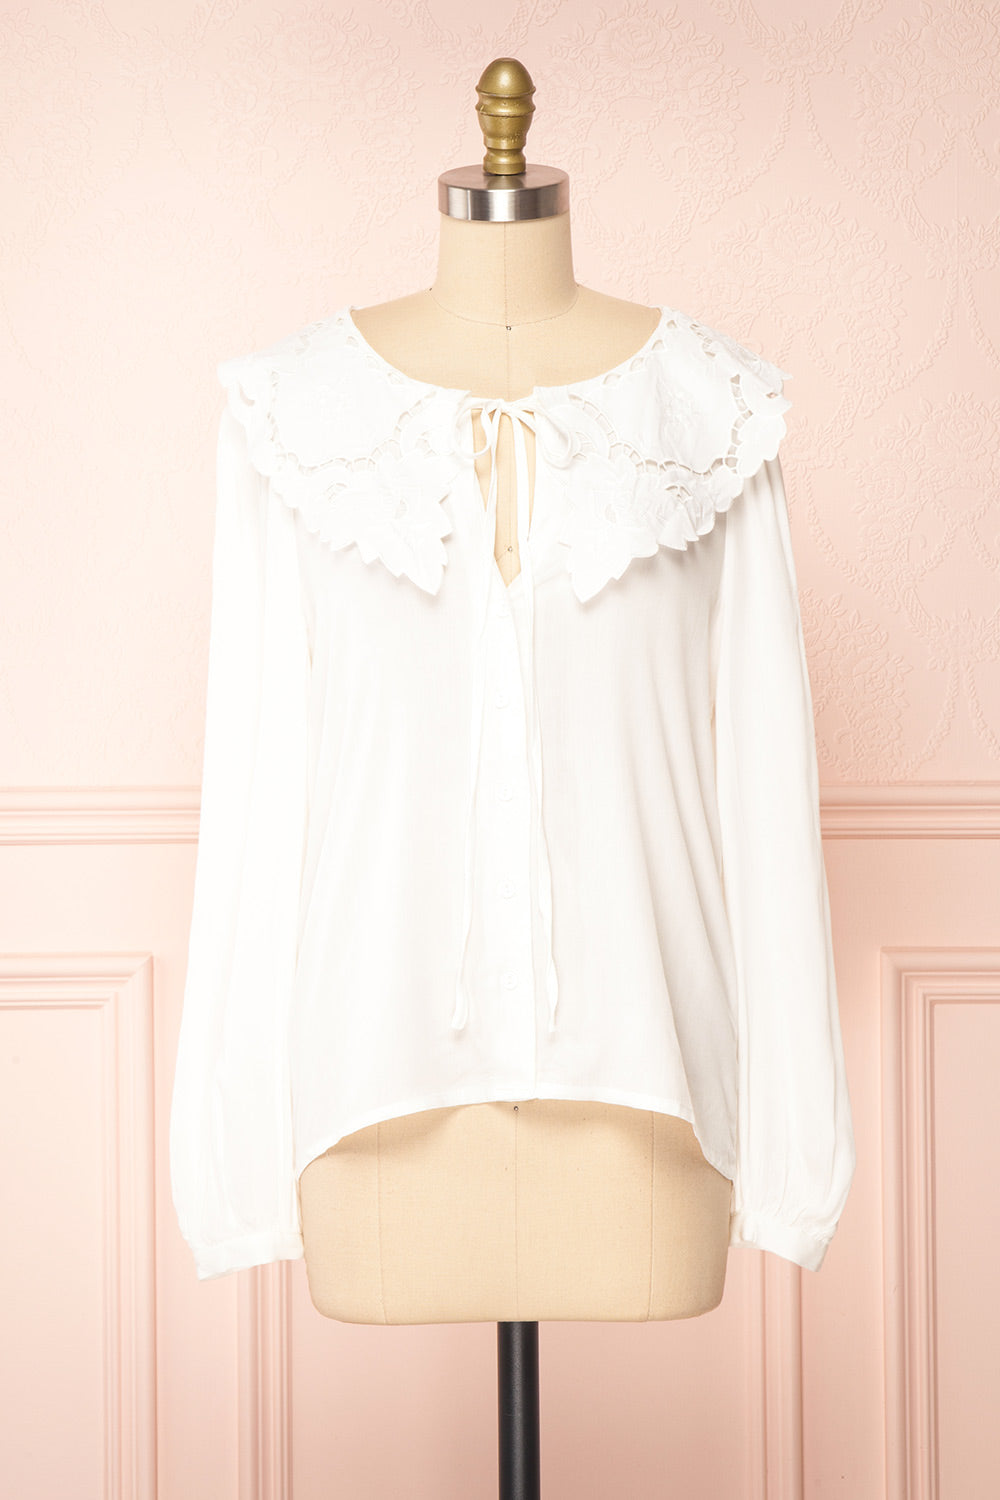 Velma White Lace Peter Pan Collar Blouse | Boutique 1861 front view 